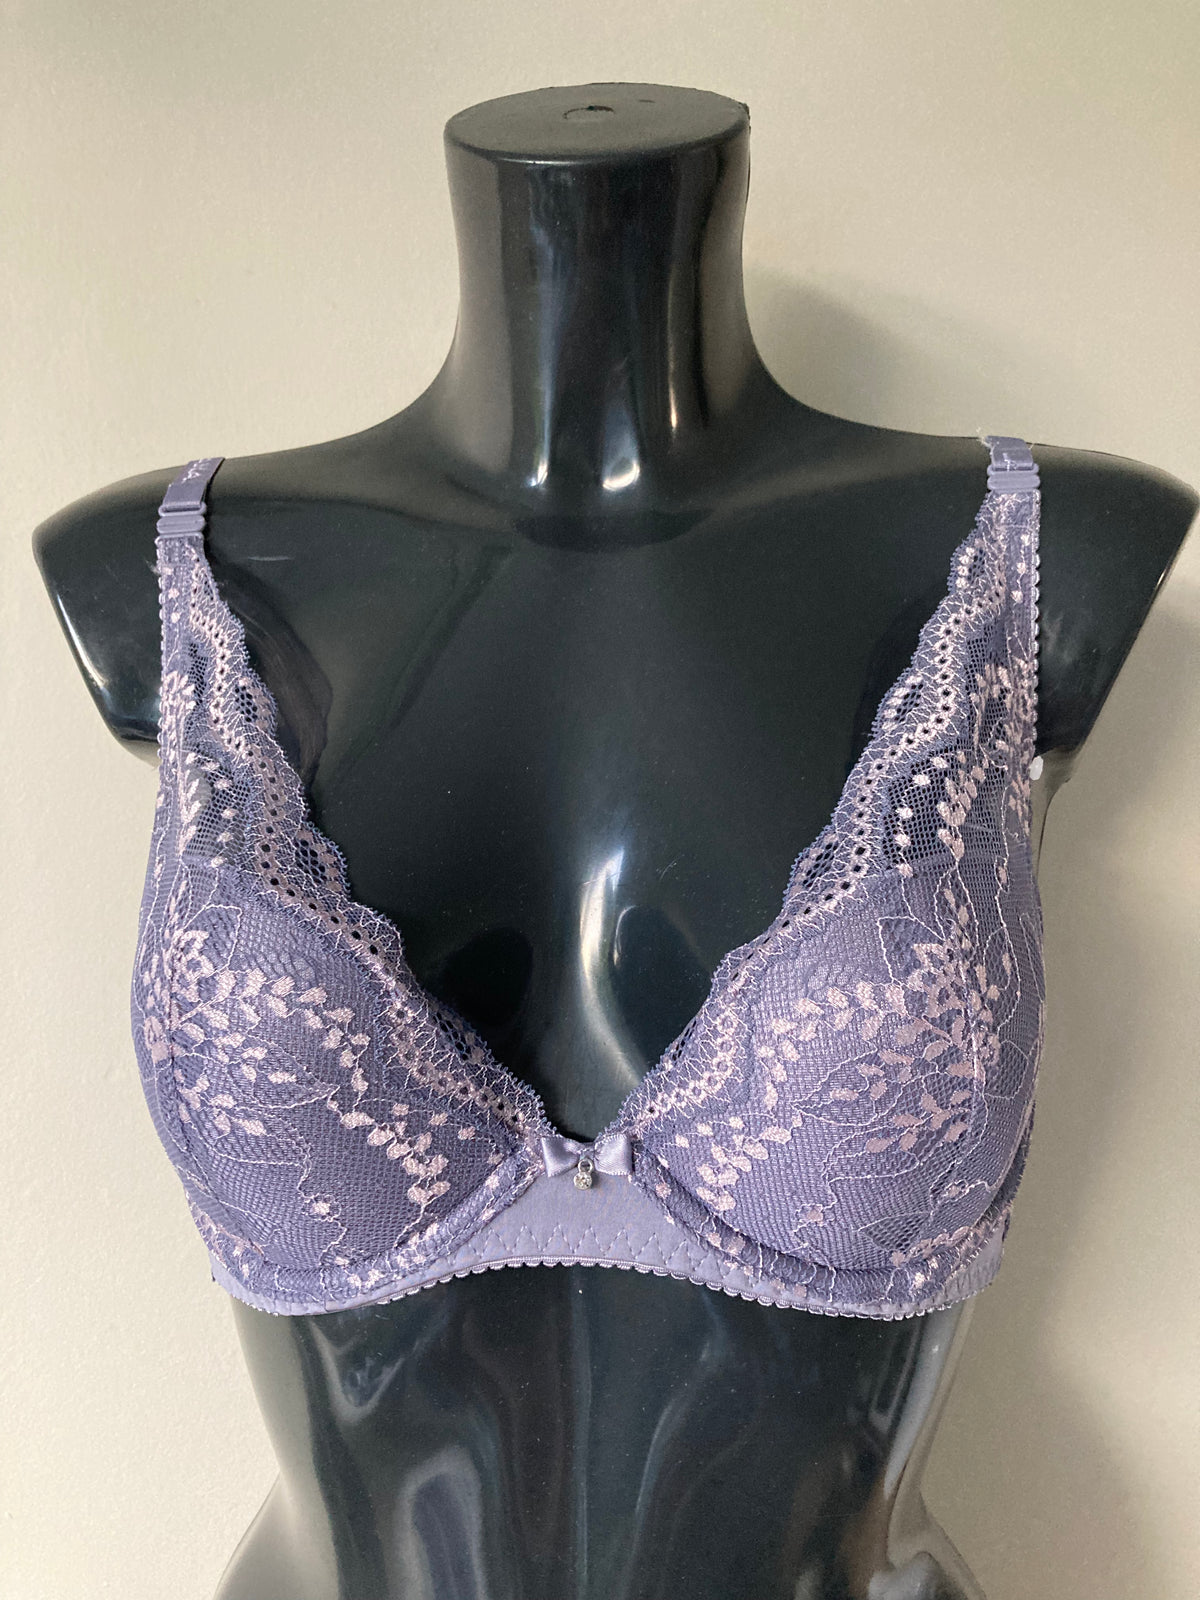 Lilrose low front Bra by LASCANA - Cup 34D – Already Made